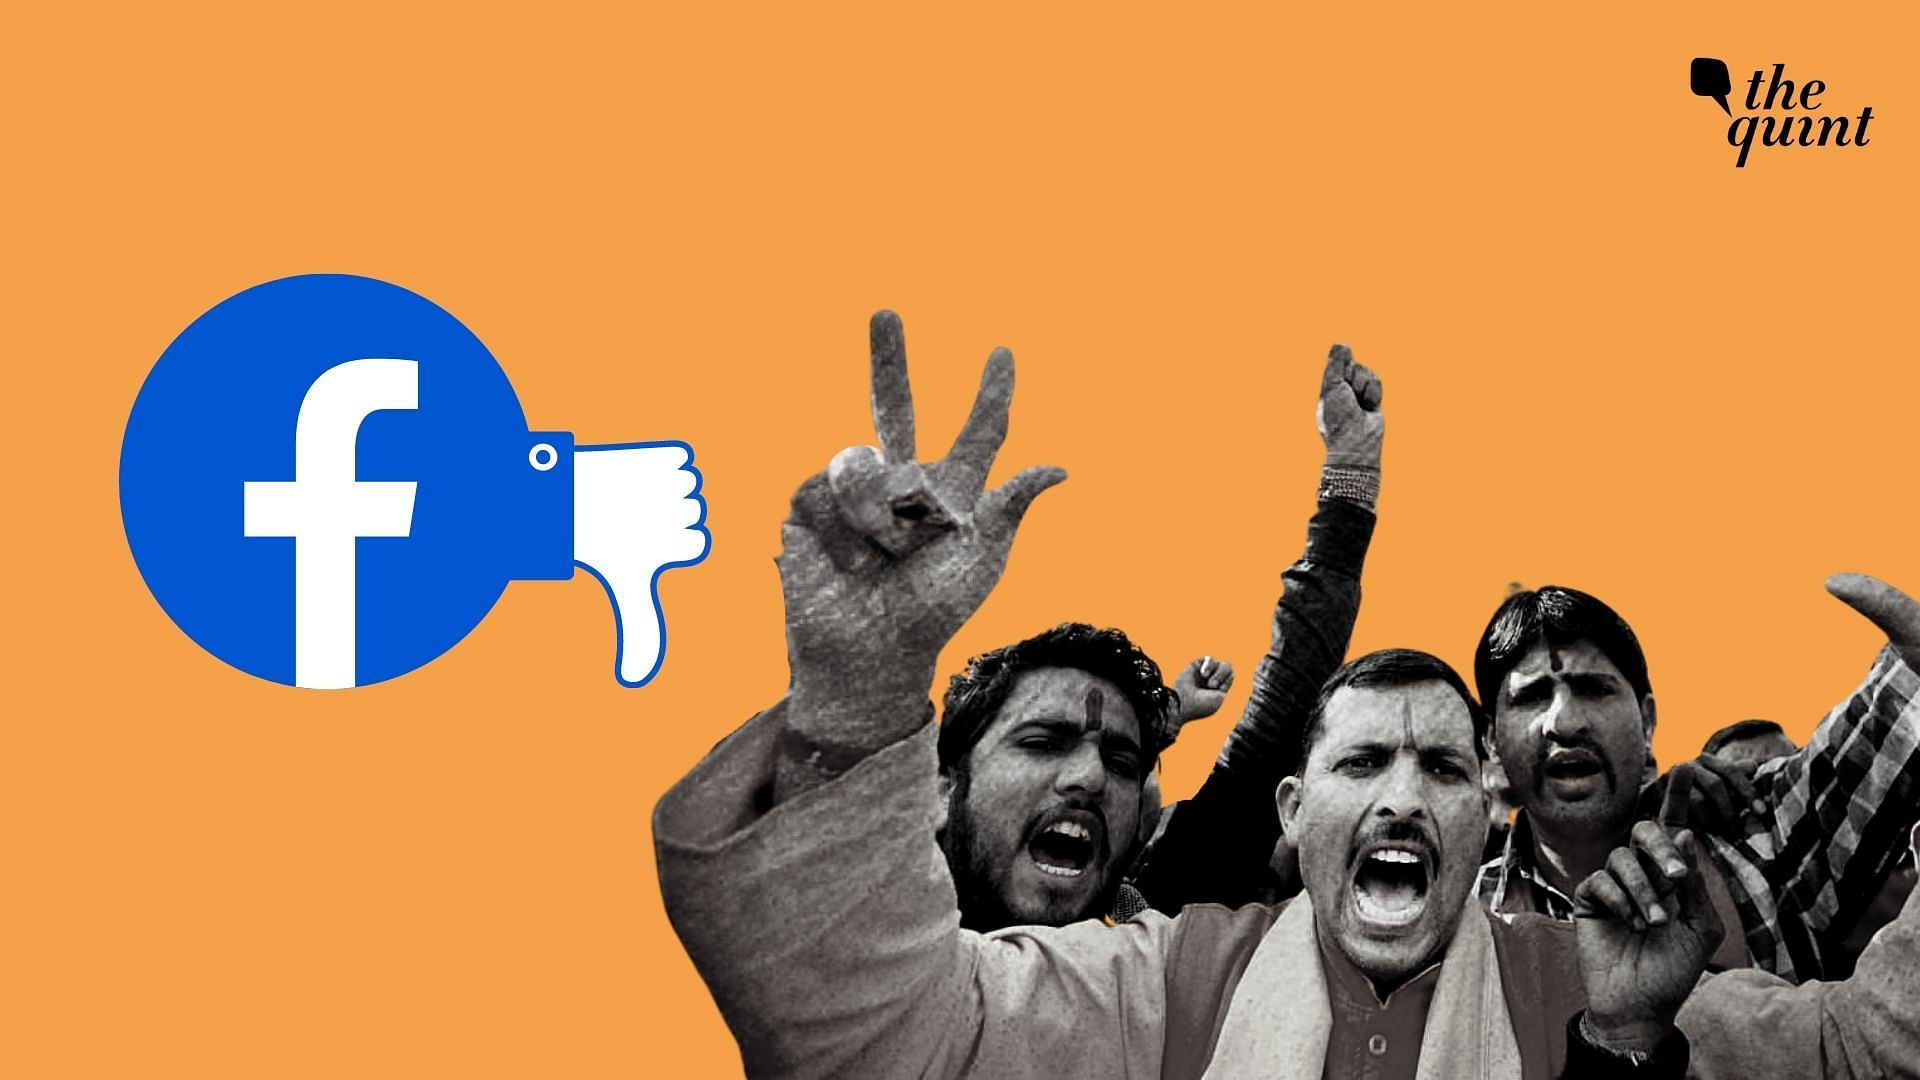 Social media giant Facebook feared crackdown in India by taking actions against right-wing groups Bajrang Dal, Sanatan Sanstha and Sri Ram Sena for hate-speech violations, a report by the Wall Street Journal has revealed.